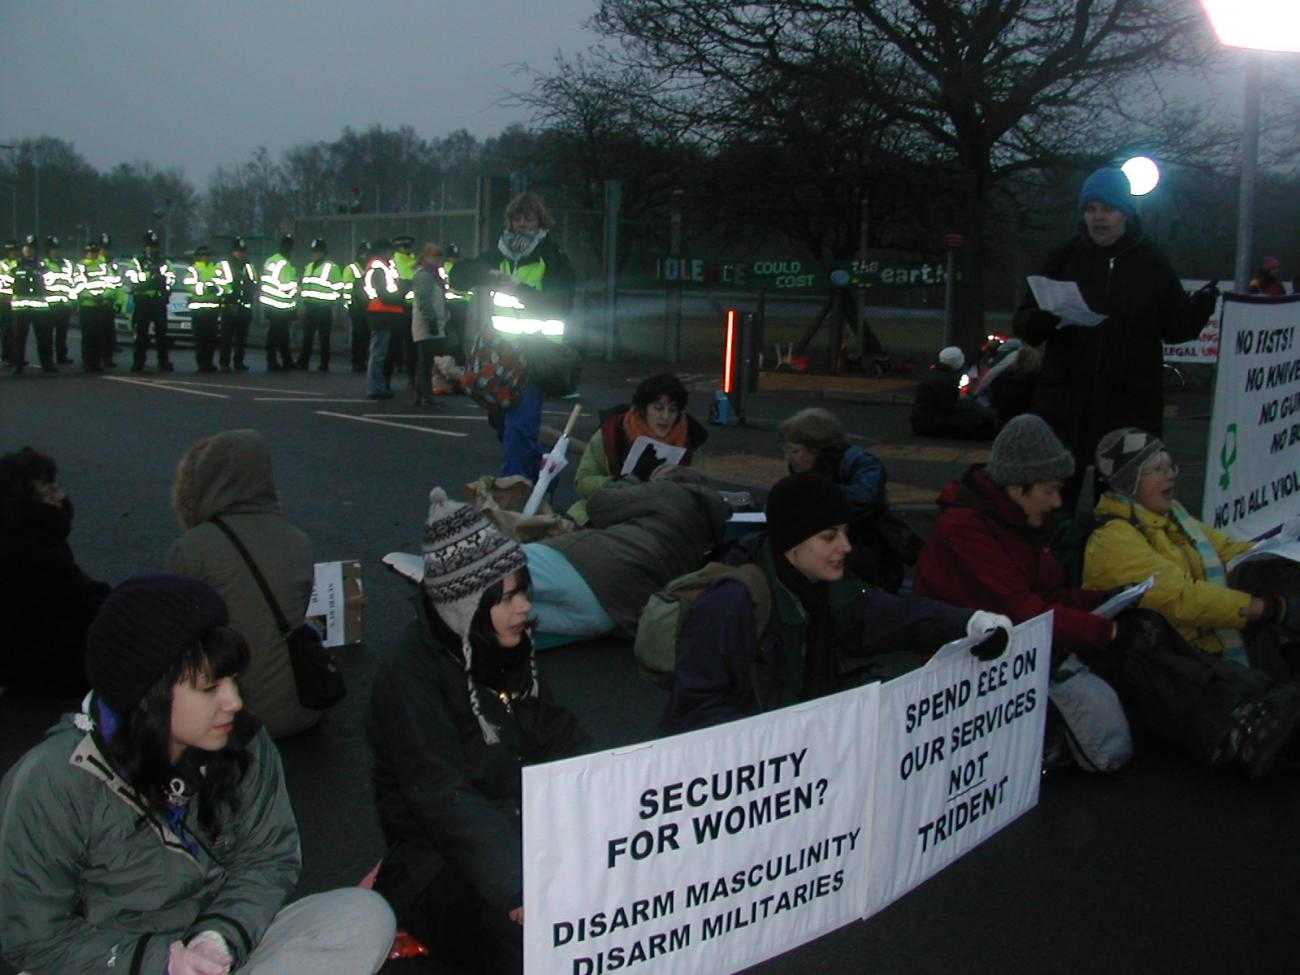 Women sit across a road in a protest against nuclear weapons. They are holding signs